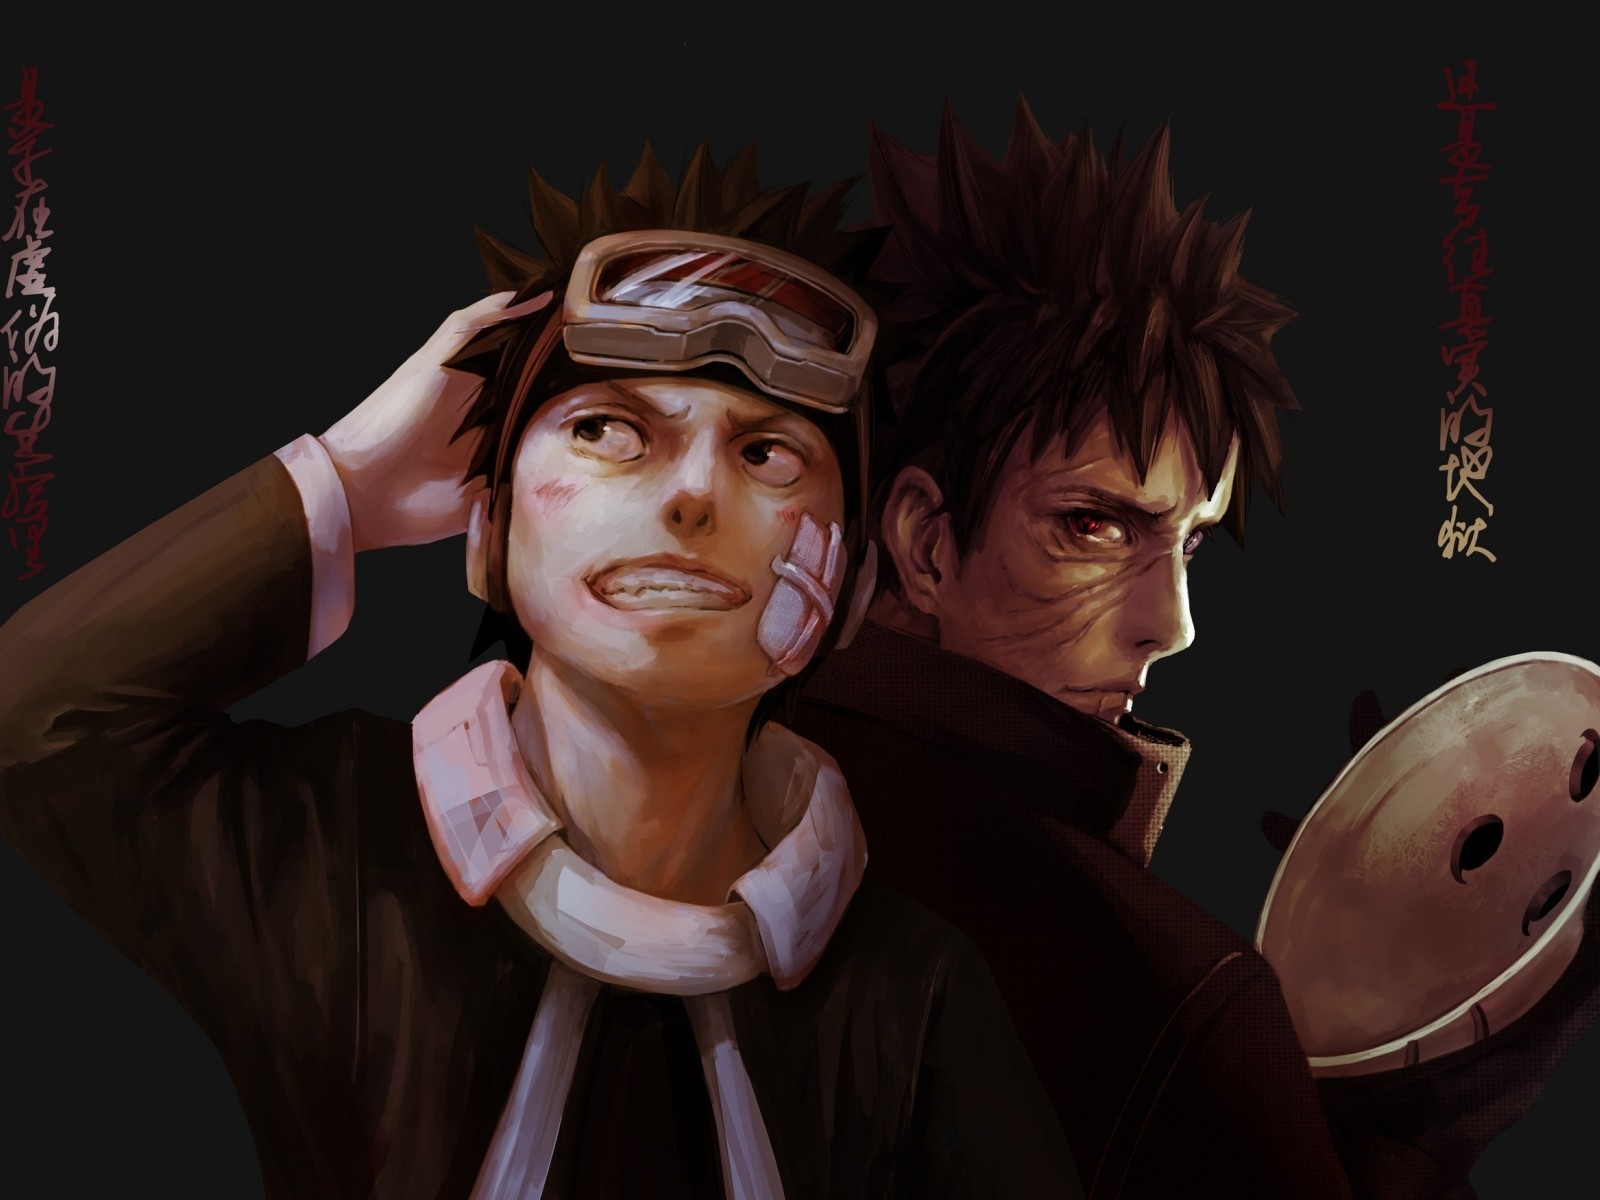 Naruto Style for 1600 x 1200 resolution